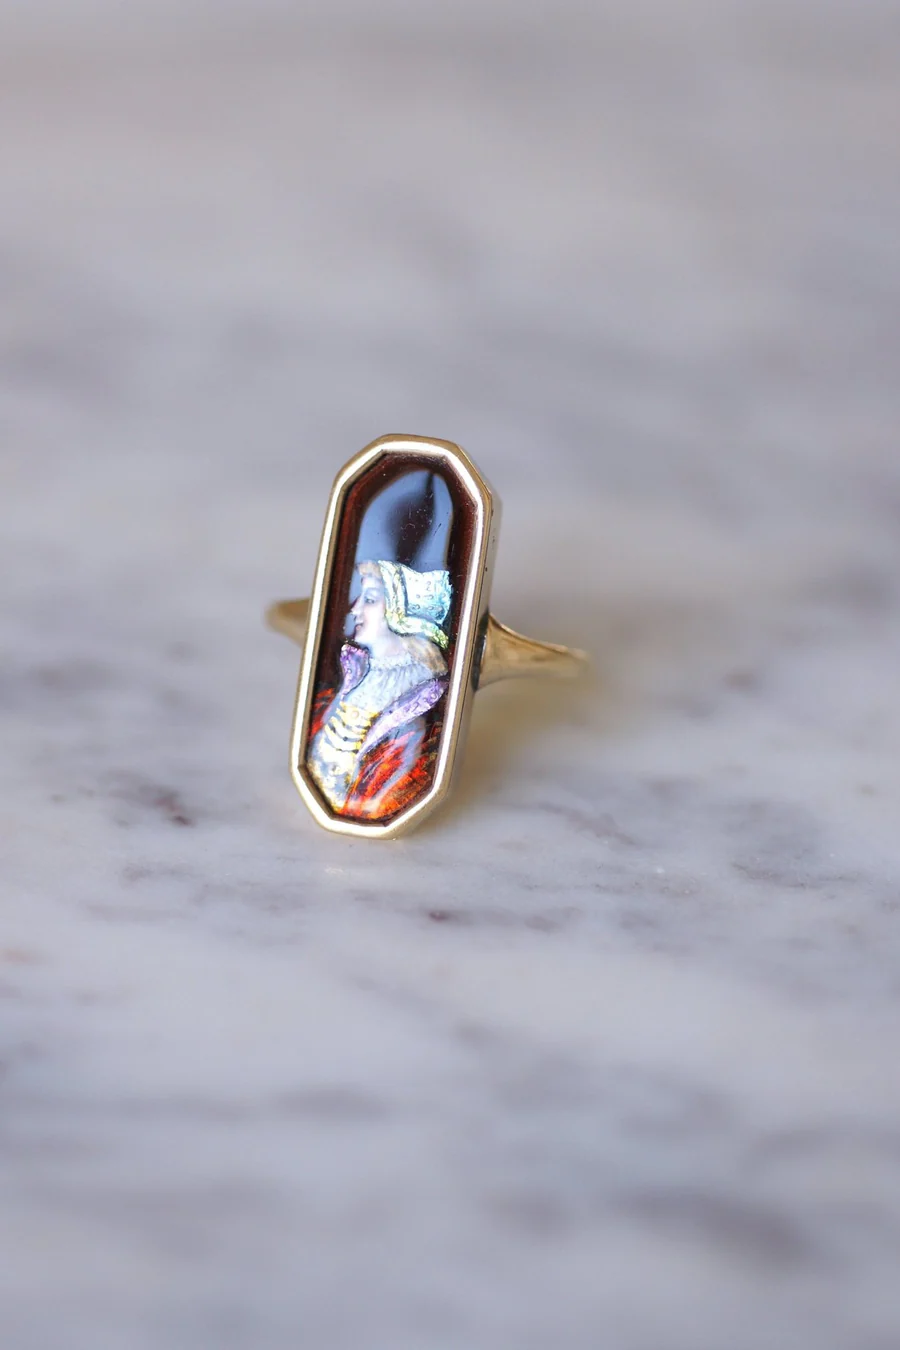 Large antique gold and enamel ring from Limoges - Galerie Pénélope